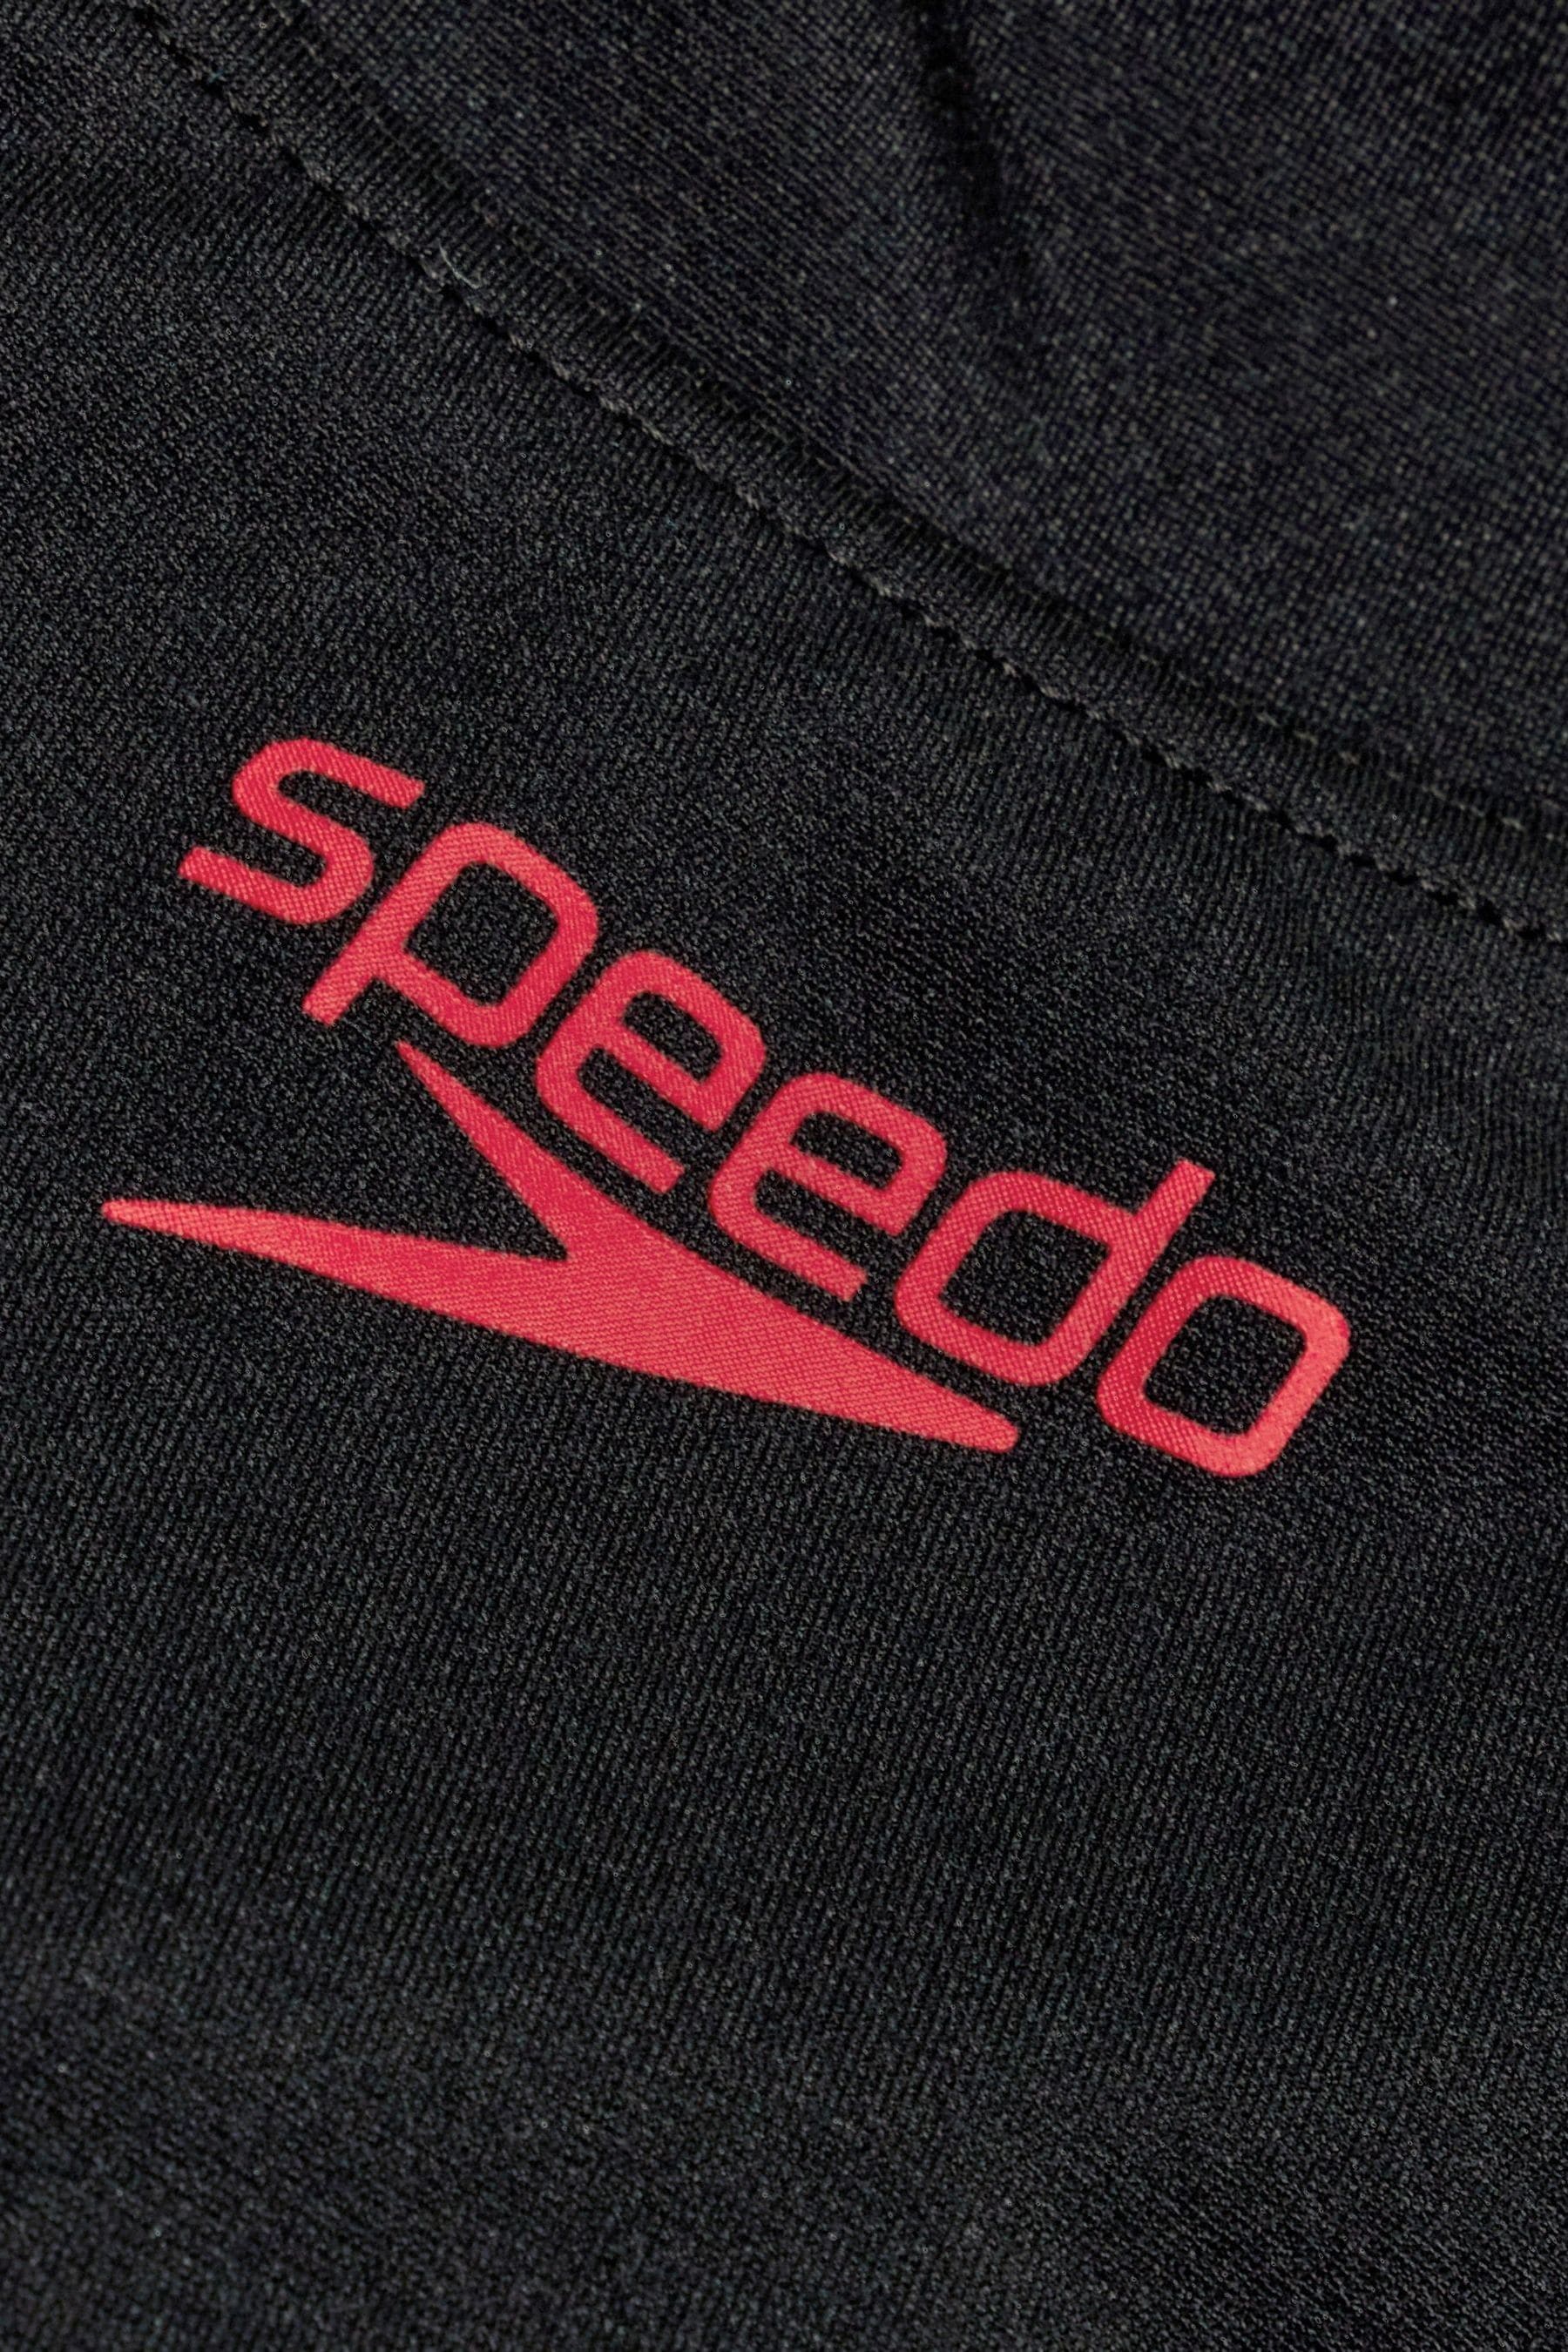 Buy Speedo Placement Muscleback Swimsuit from the Next UK online shop